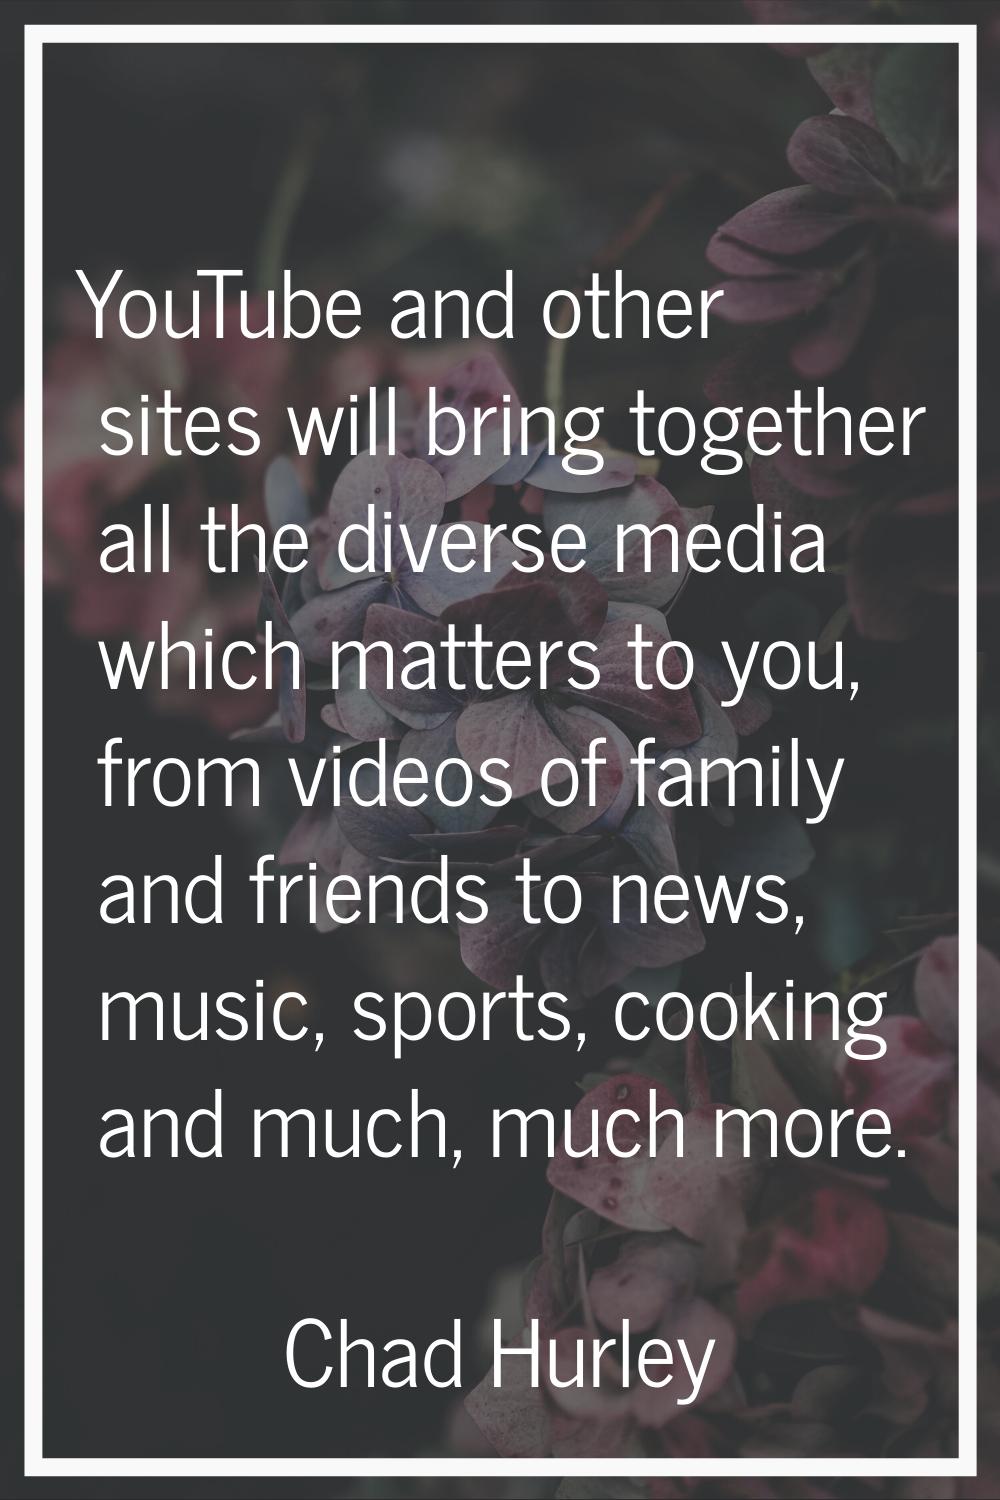 YouTube and other sites will bring together all the diverse media which matters to you, from videos